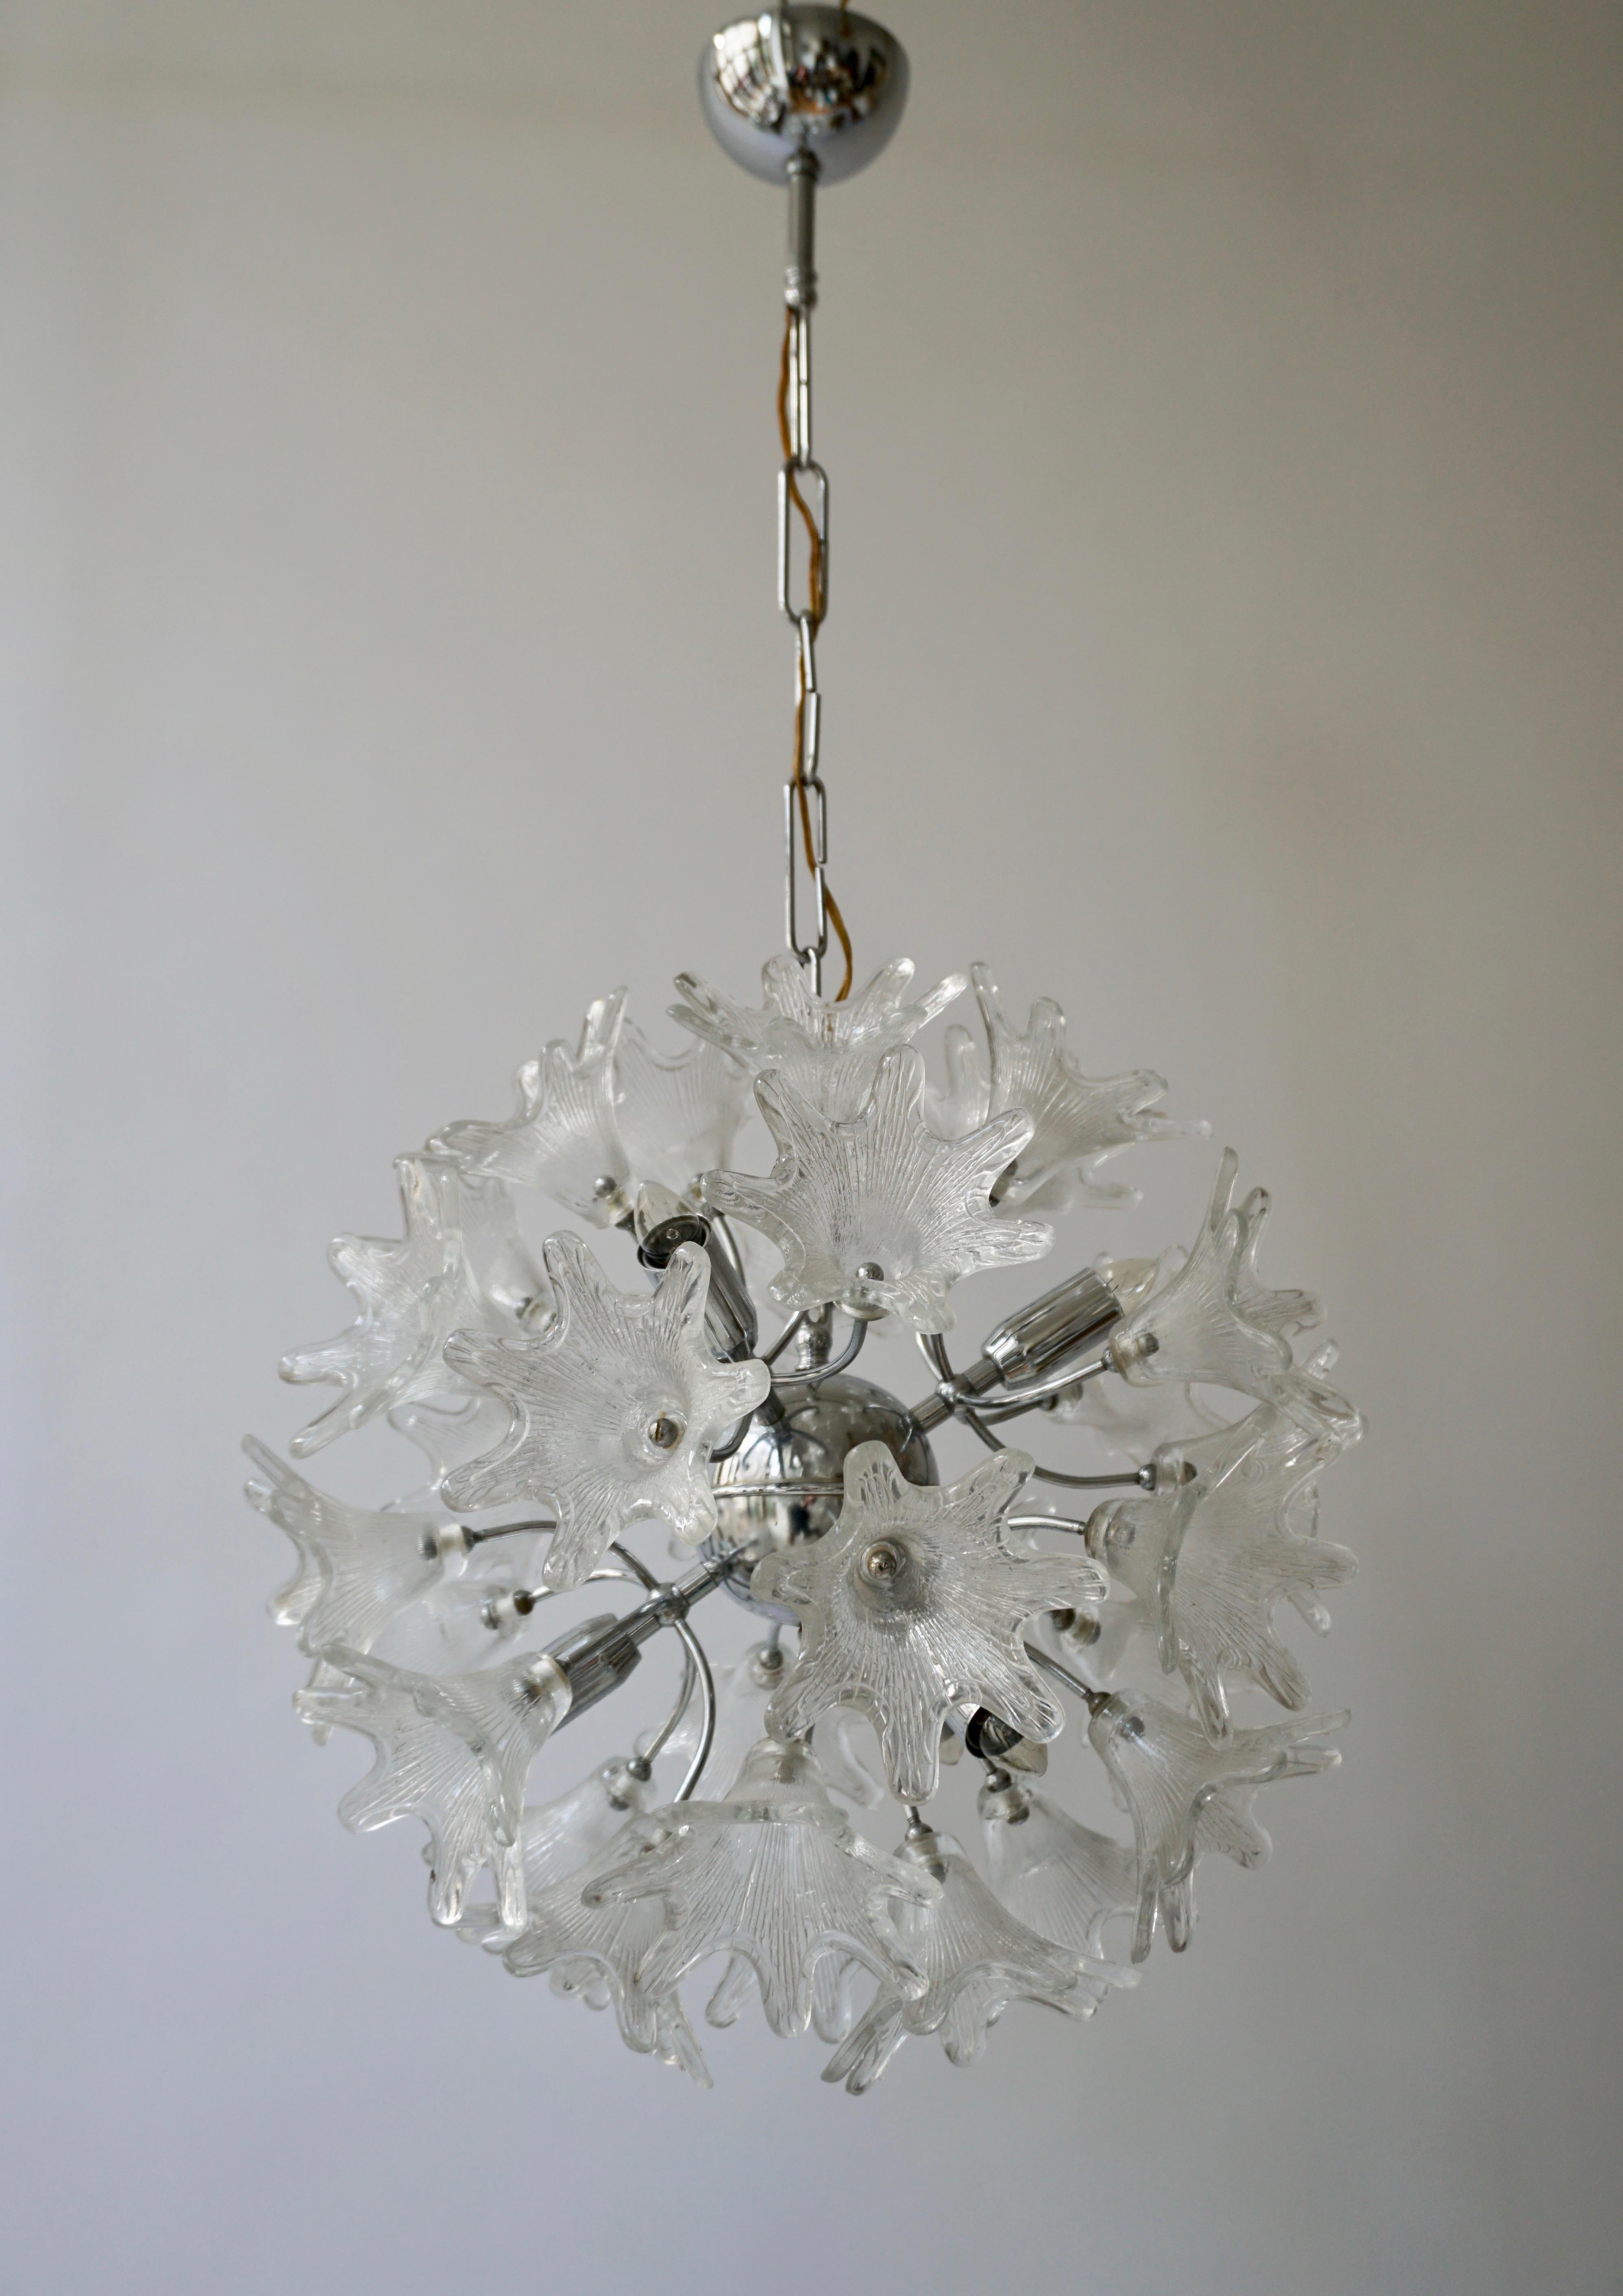 Exquisite two Murano Venini sputnik chandeliers with textured clear hand blown flowers petals set on chrome hardware.
Diameter:40 cm.
Height:70 cm.